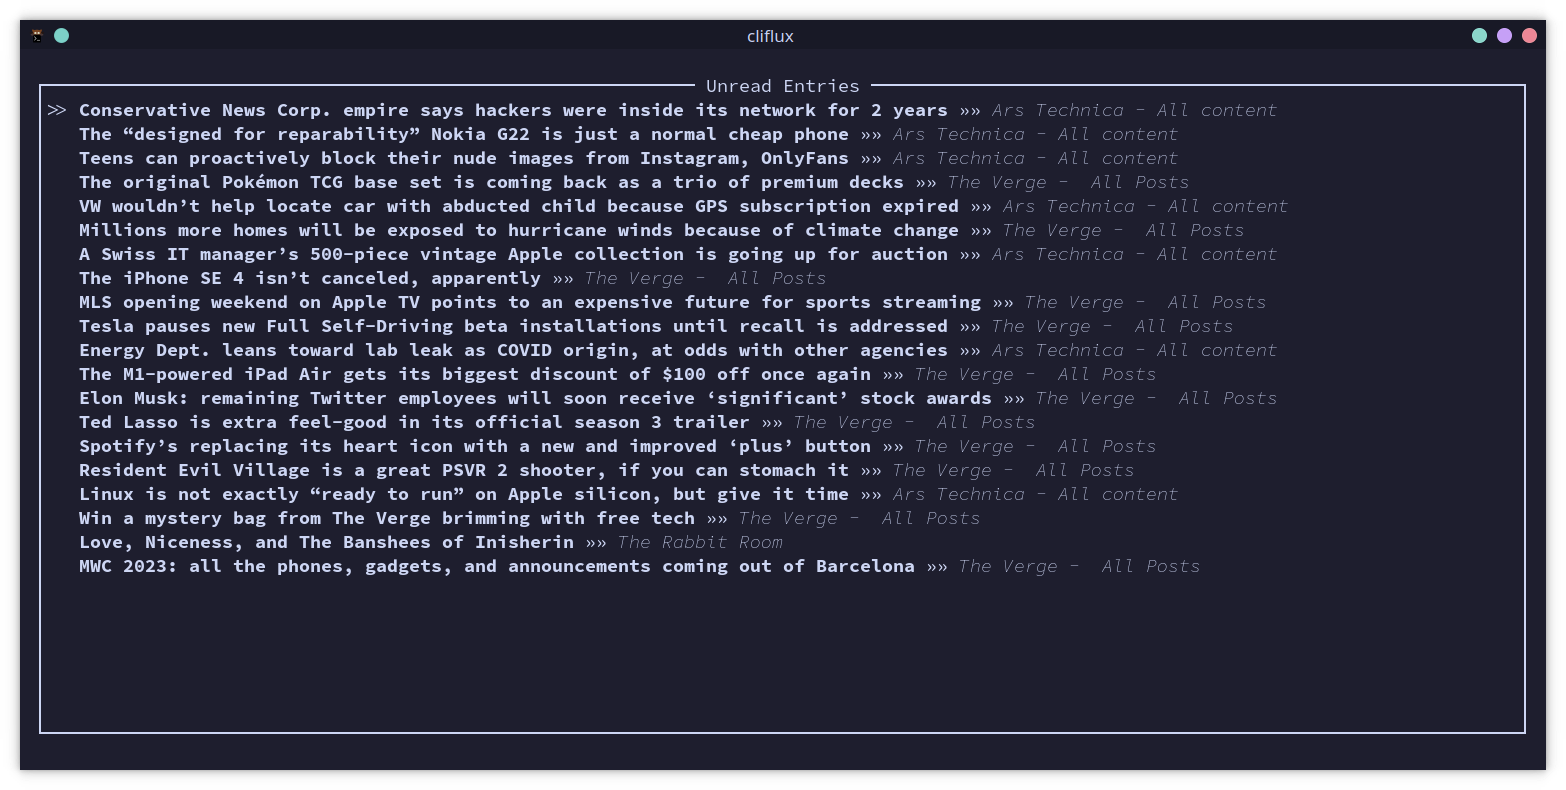 A screenshot of cliflux showing the "unread entries" list